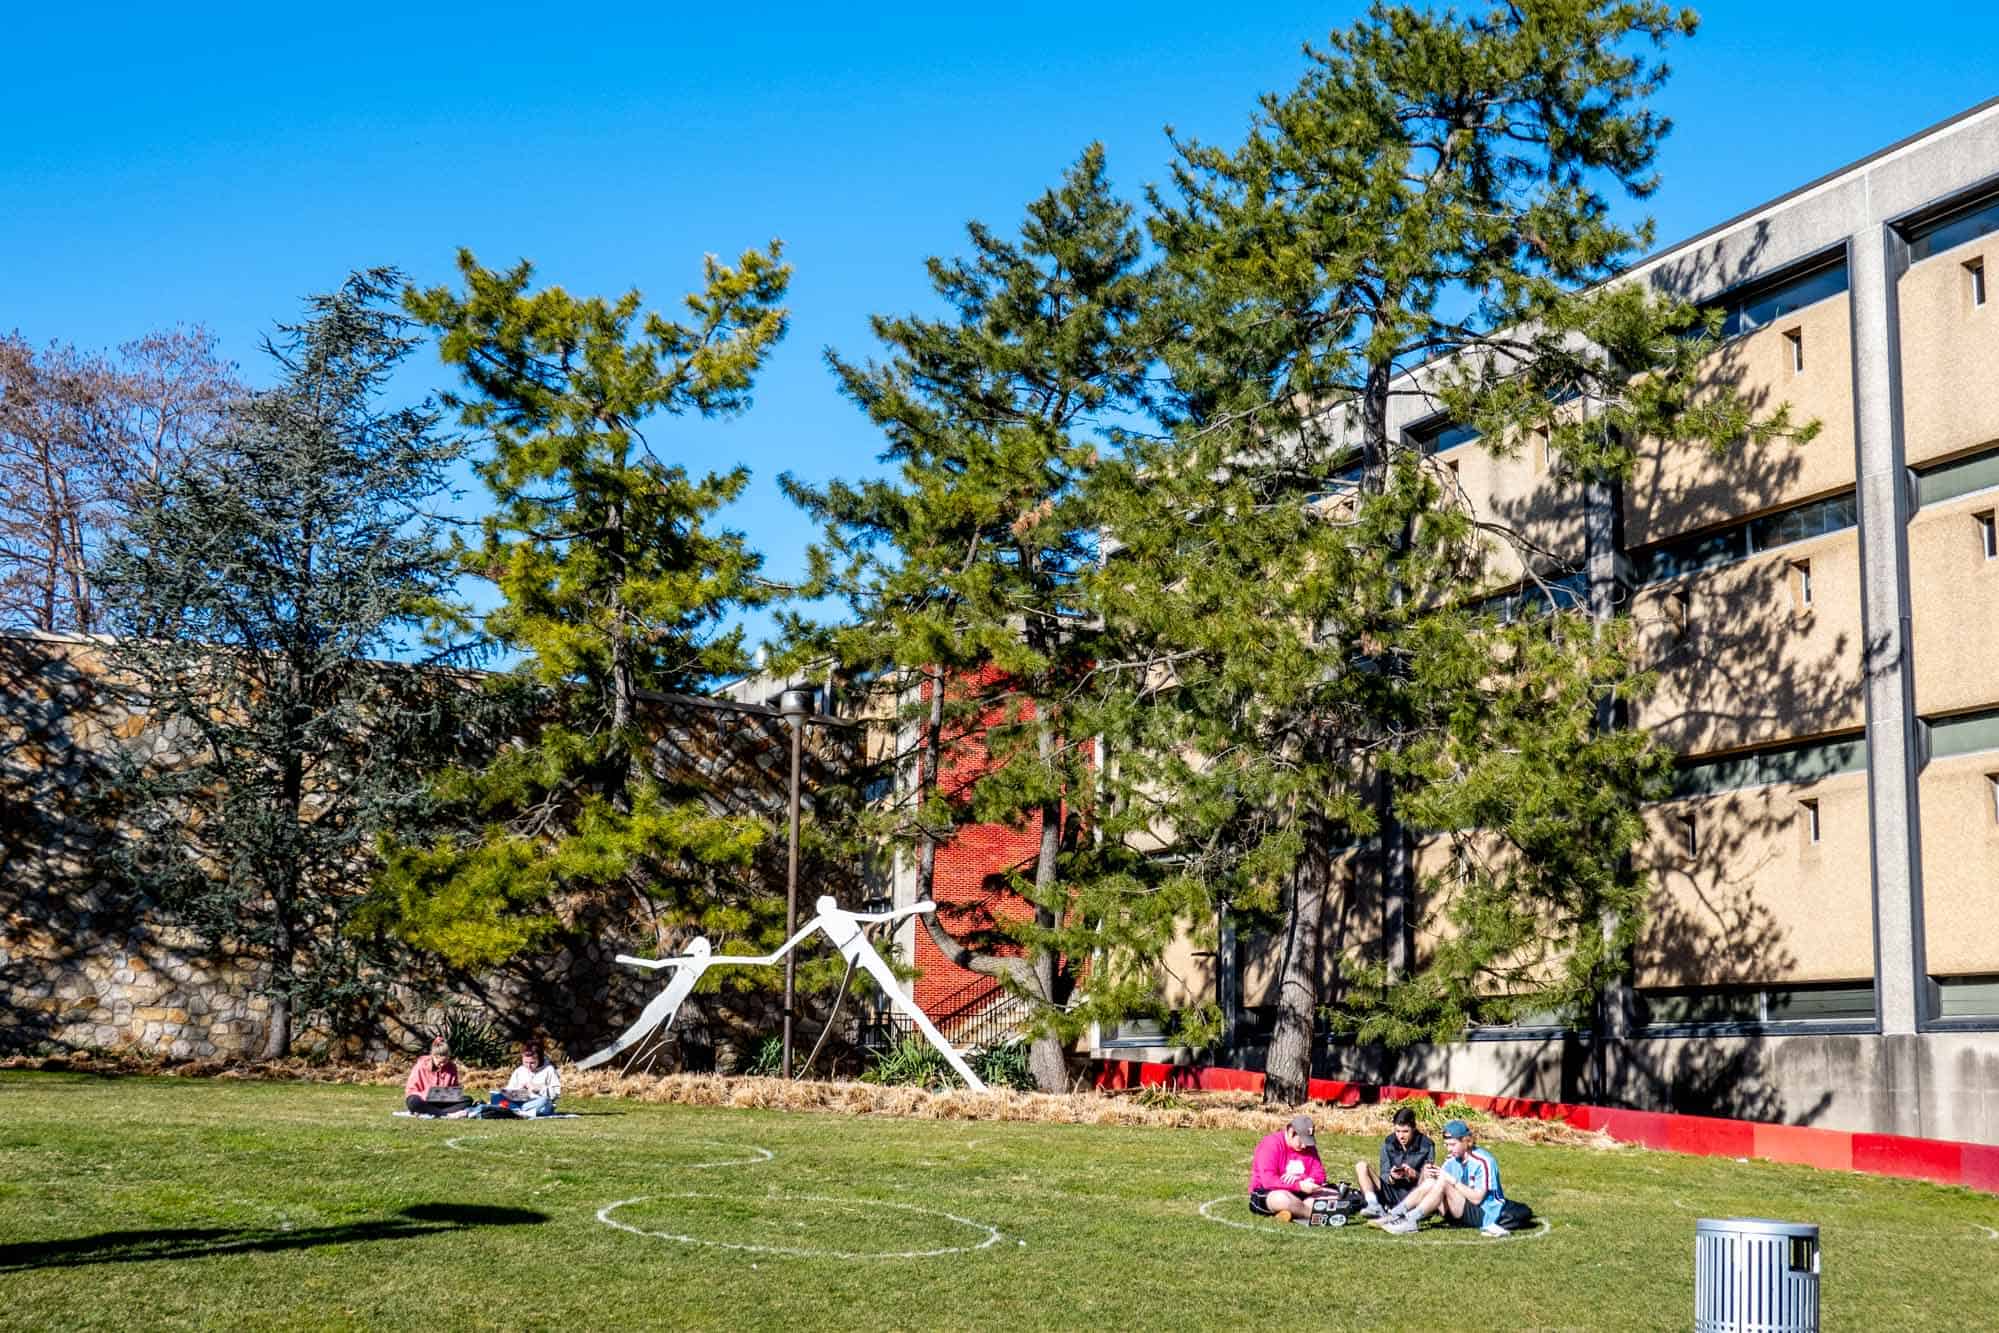 Students on grassy lawn